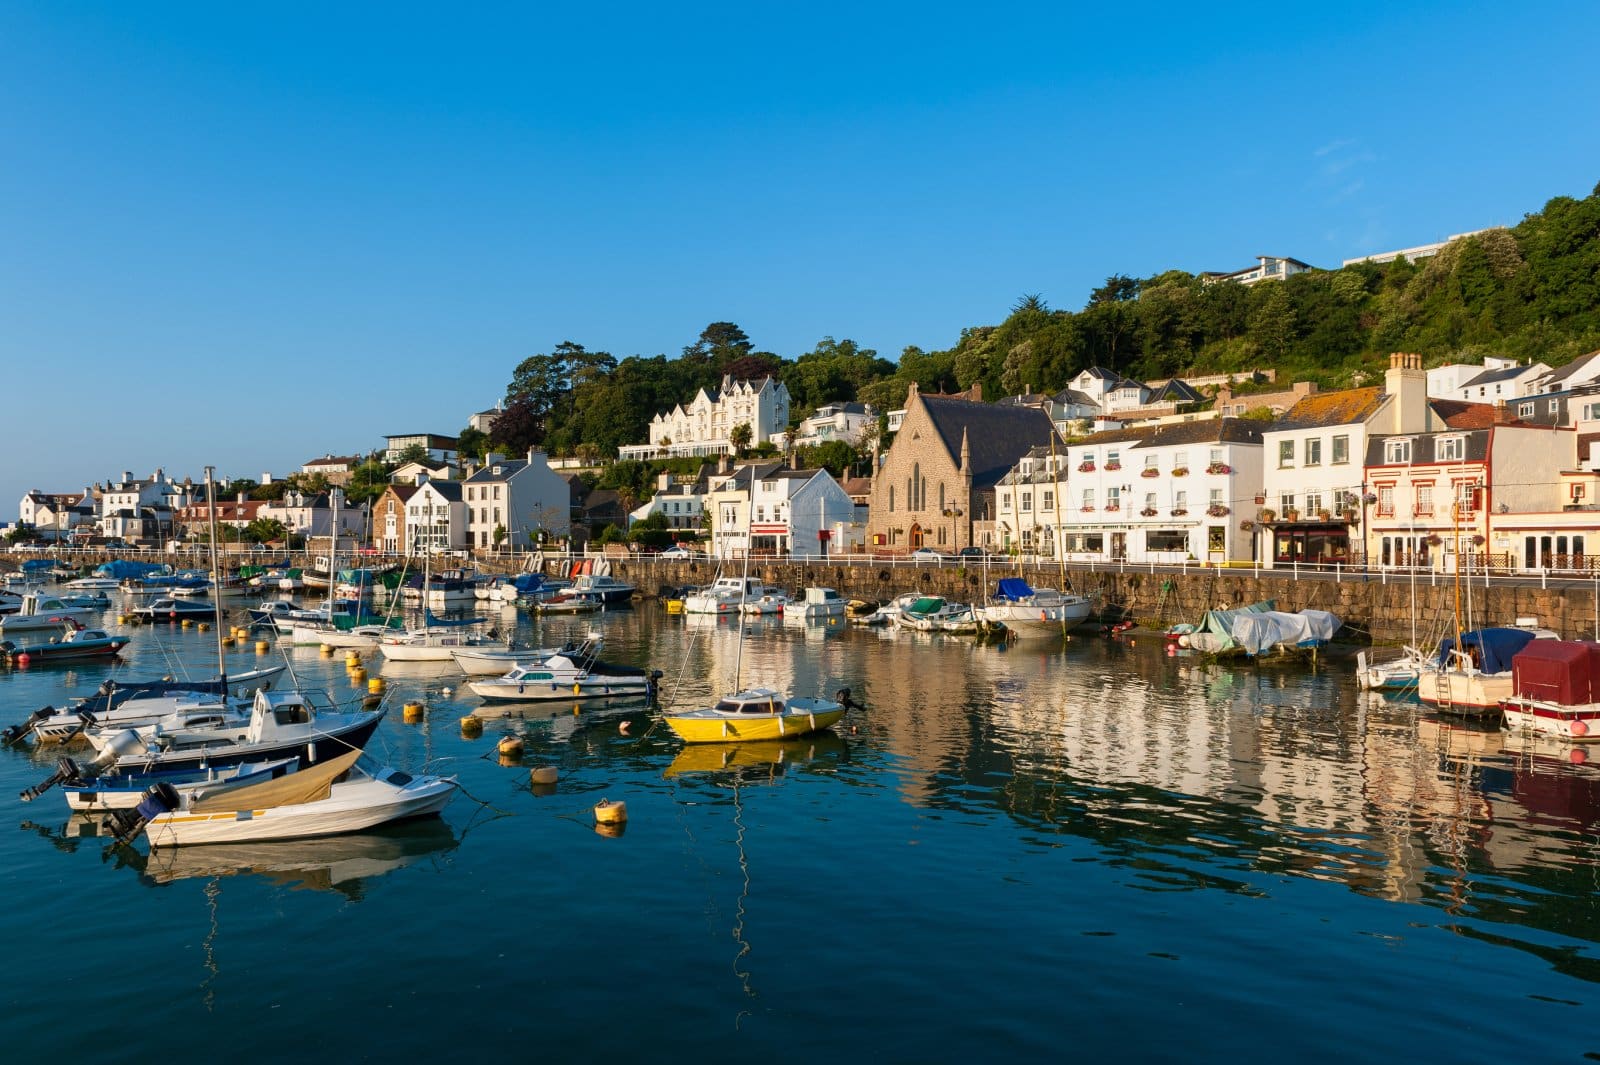 Image Credit: Shutterstock / Allard One <p>Topping our list, Jersey, although not a county but a crown dependency, basks in more sunlight than anywhere else in the British Isles. Its beaches, coves, and walking trails are bathed in sunshine, making it the UK’s very own piece of paradise.</p>